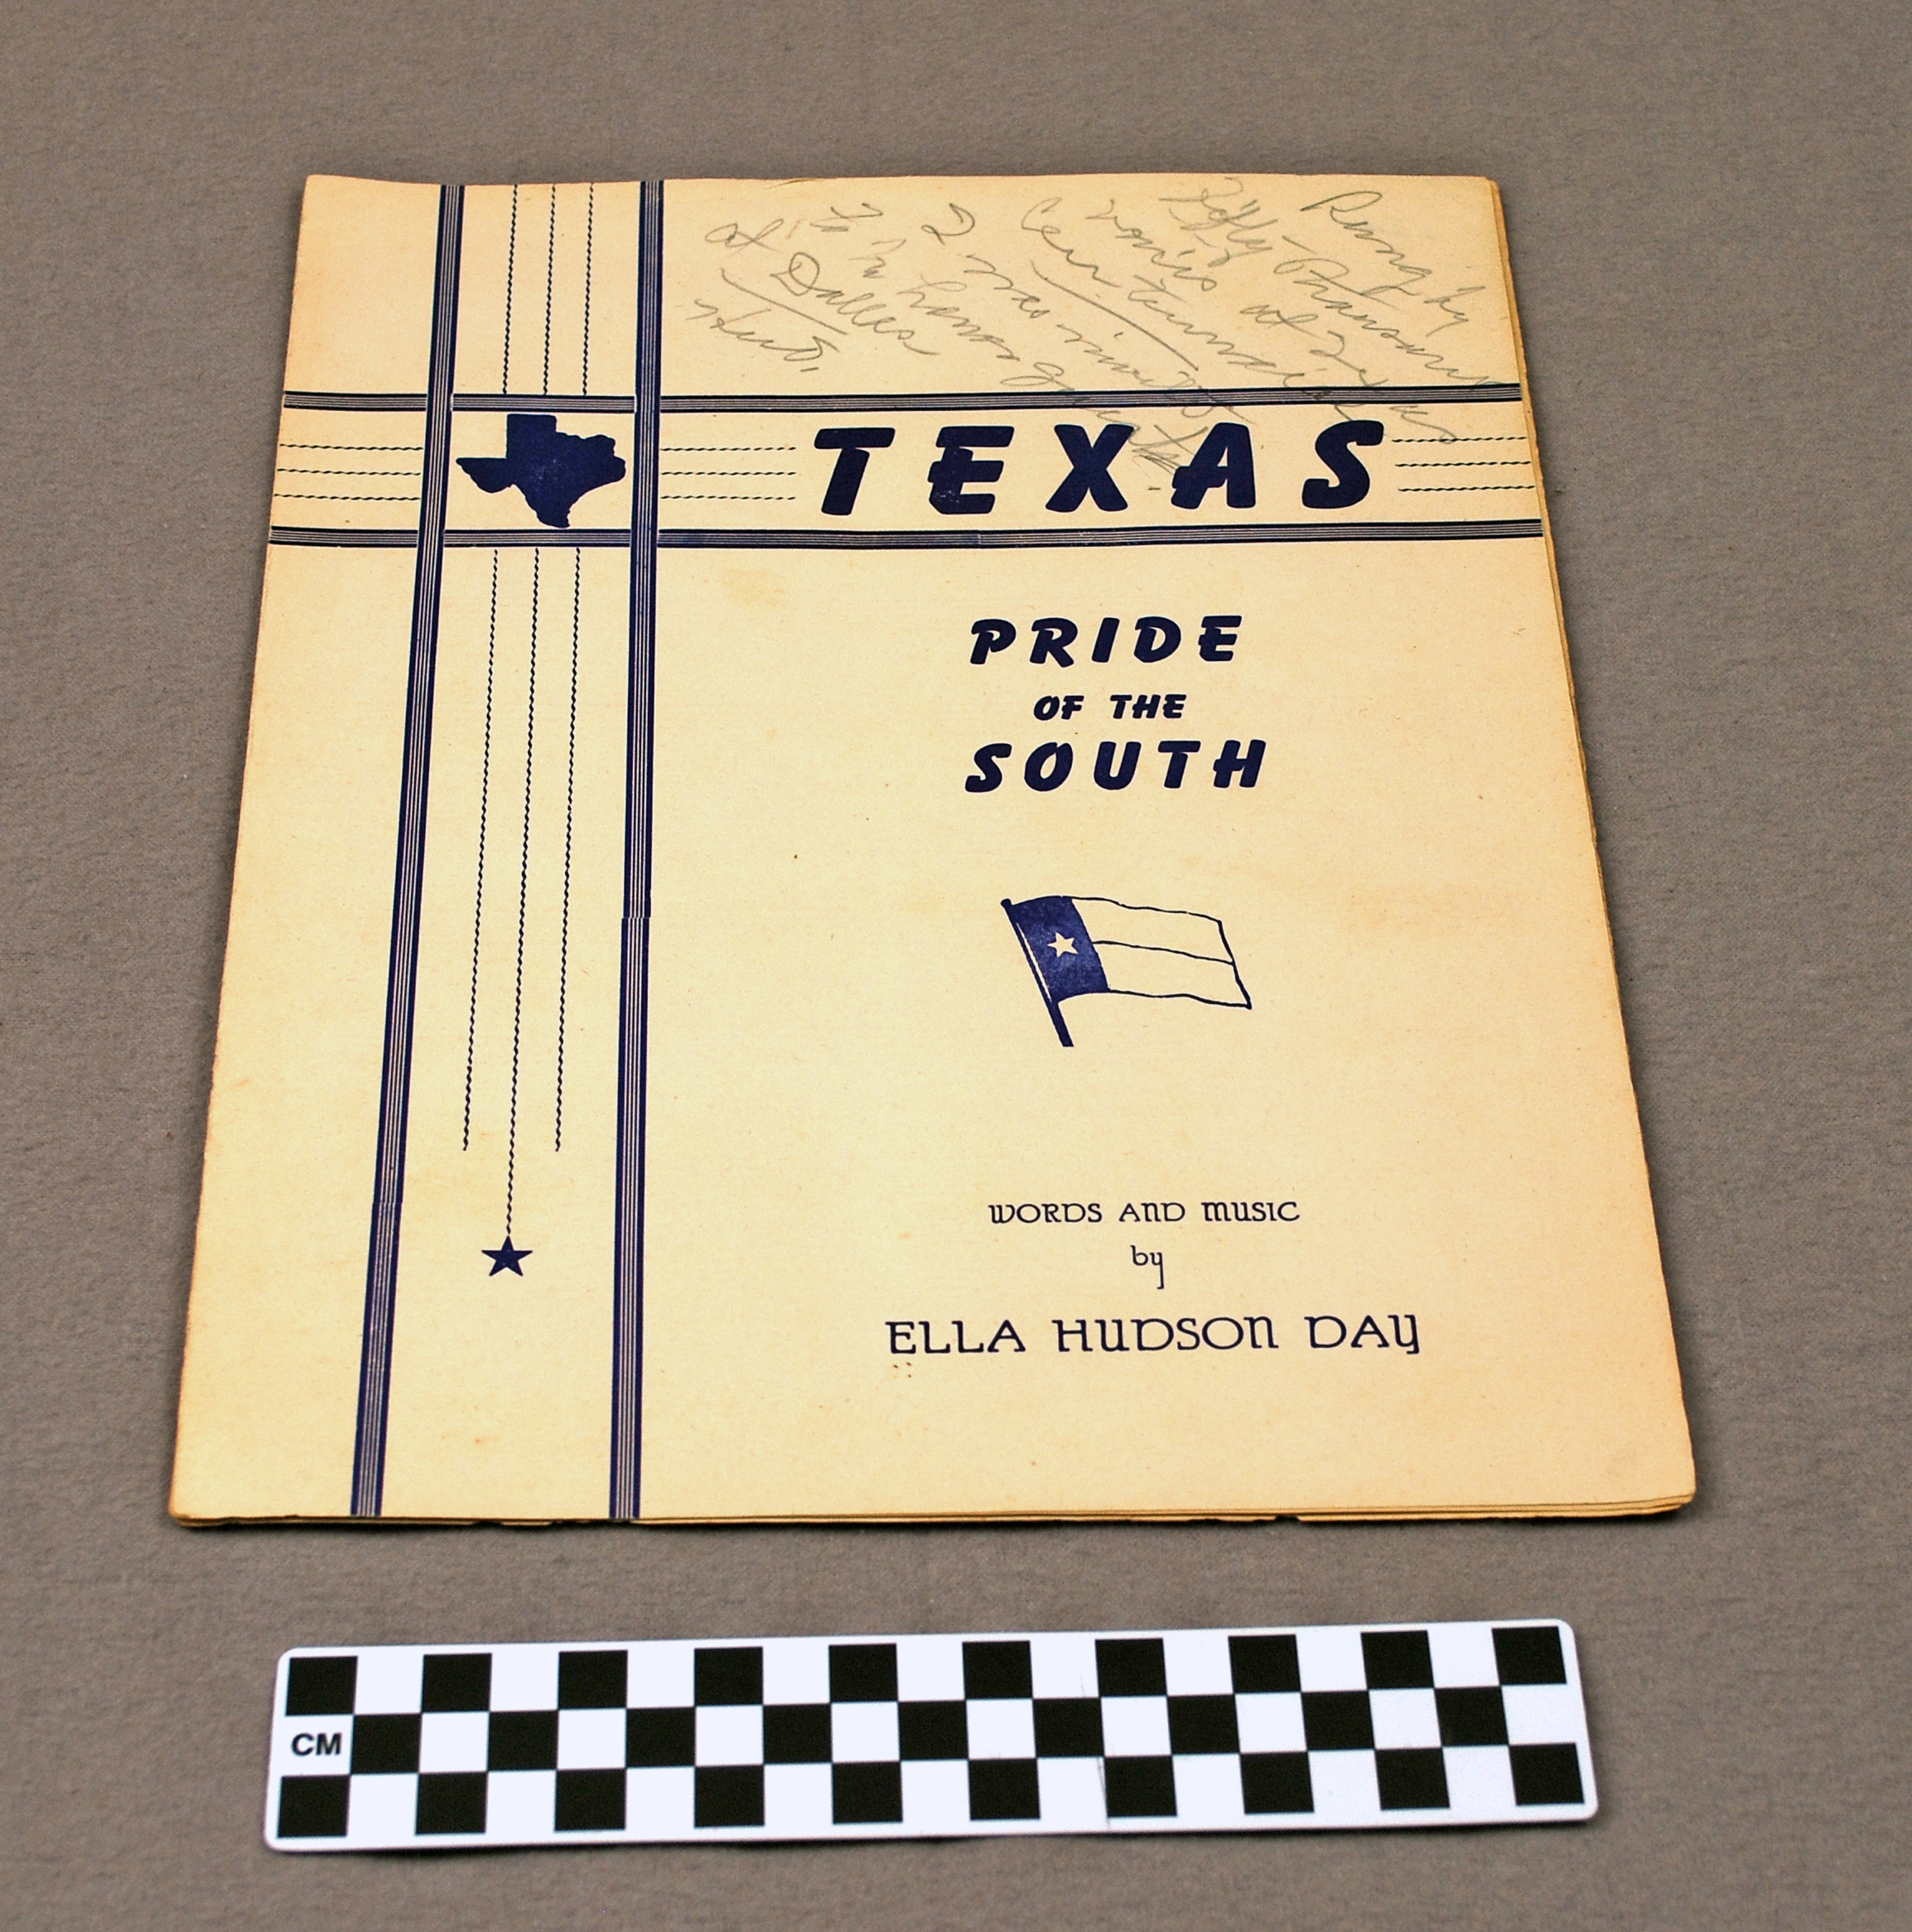 Object: Music Sheet (Texas Pride of the South)